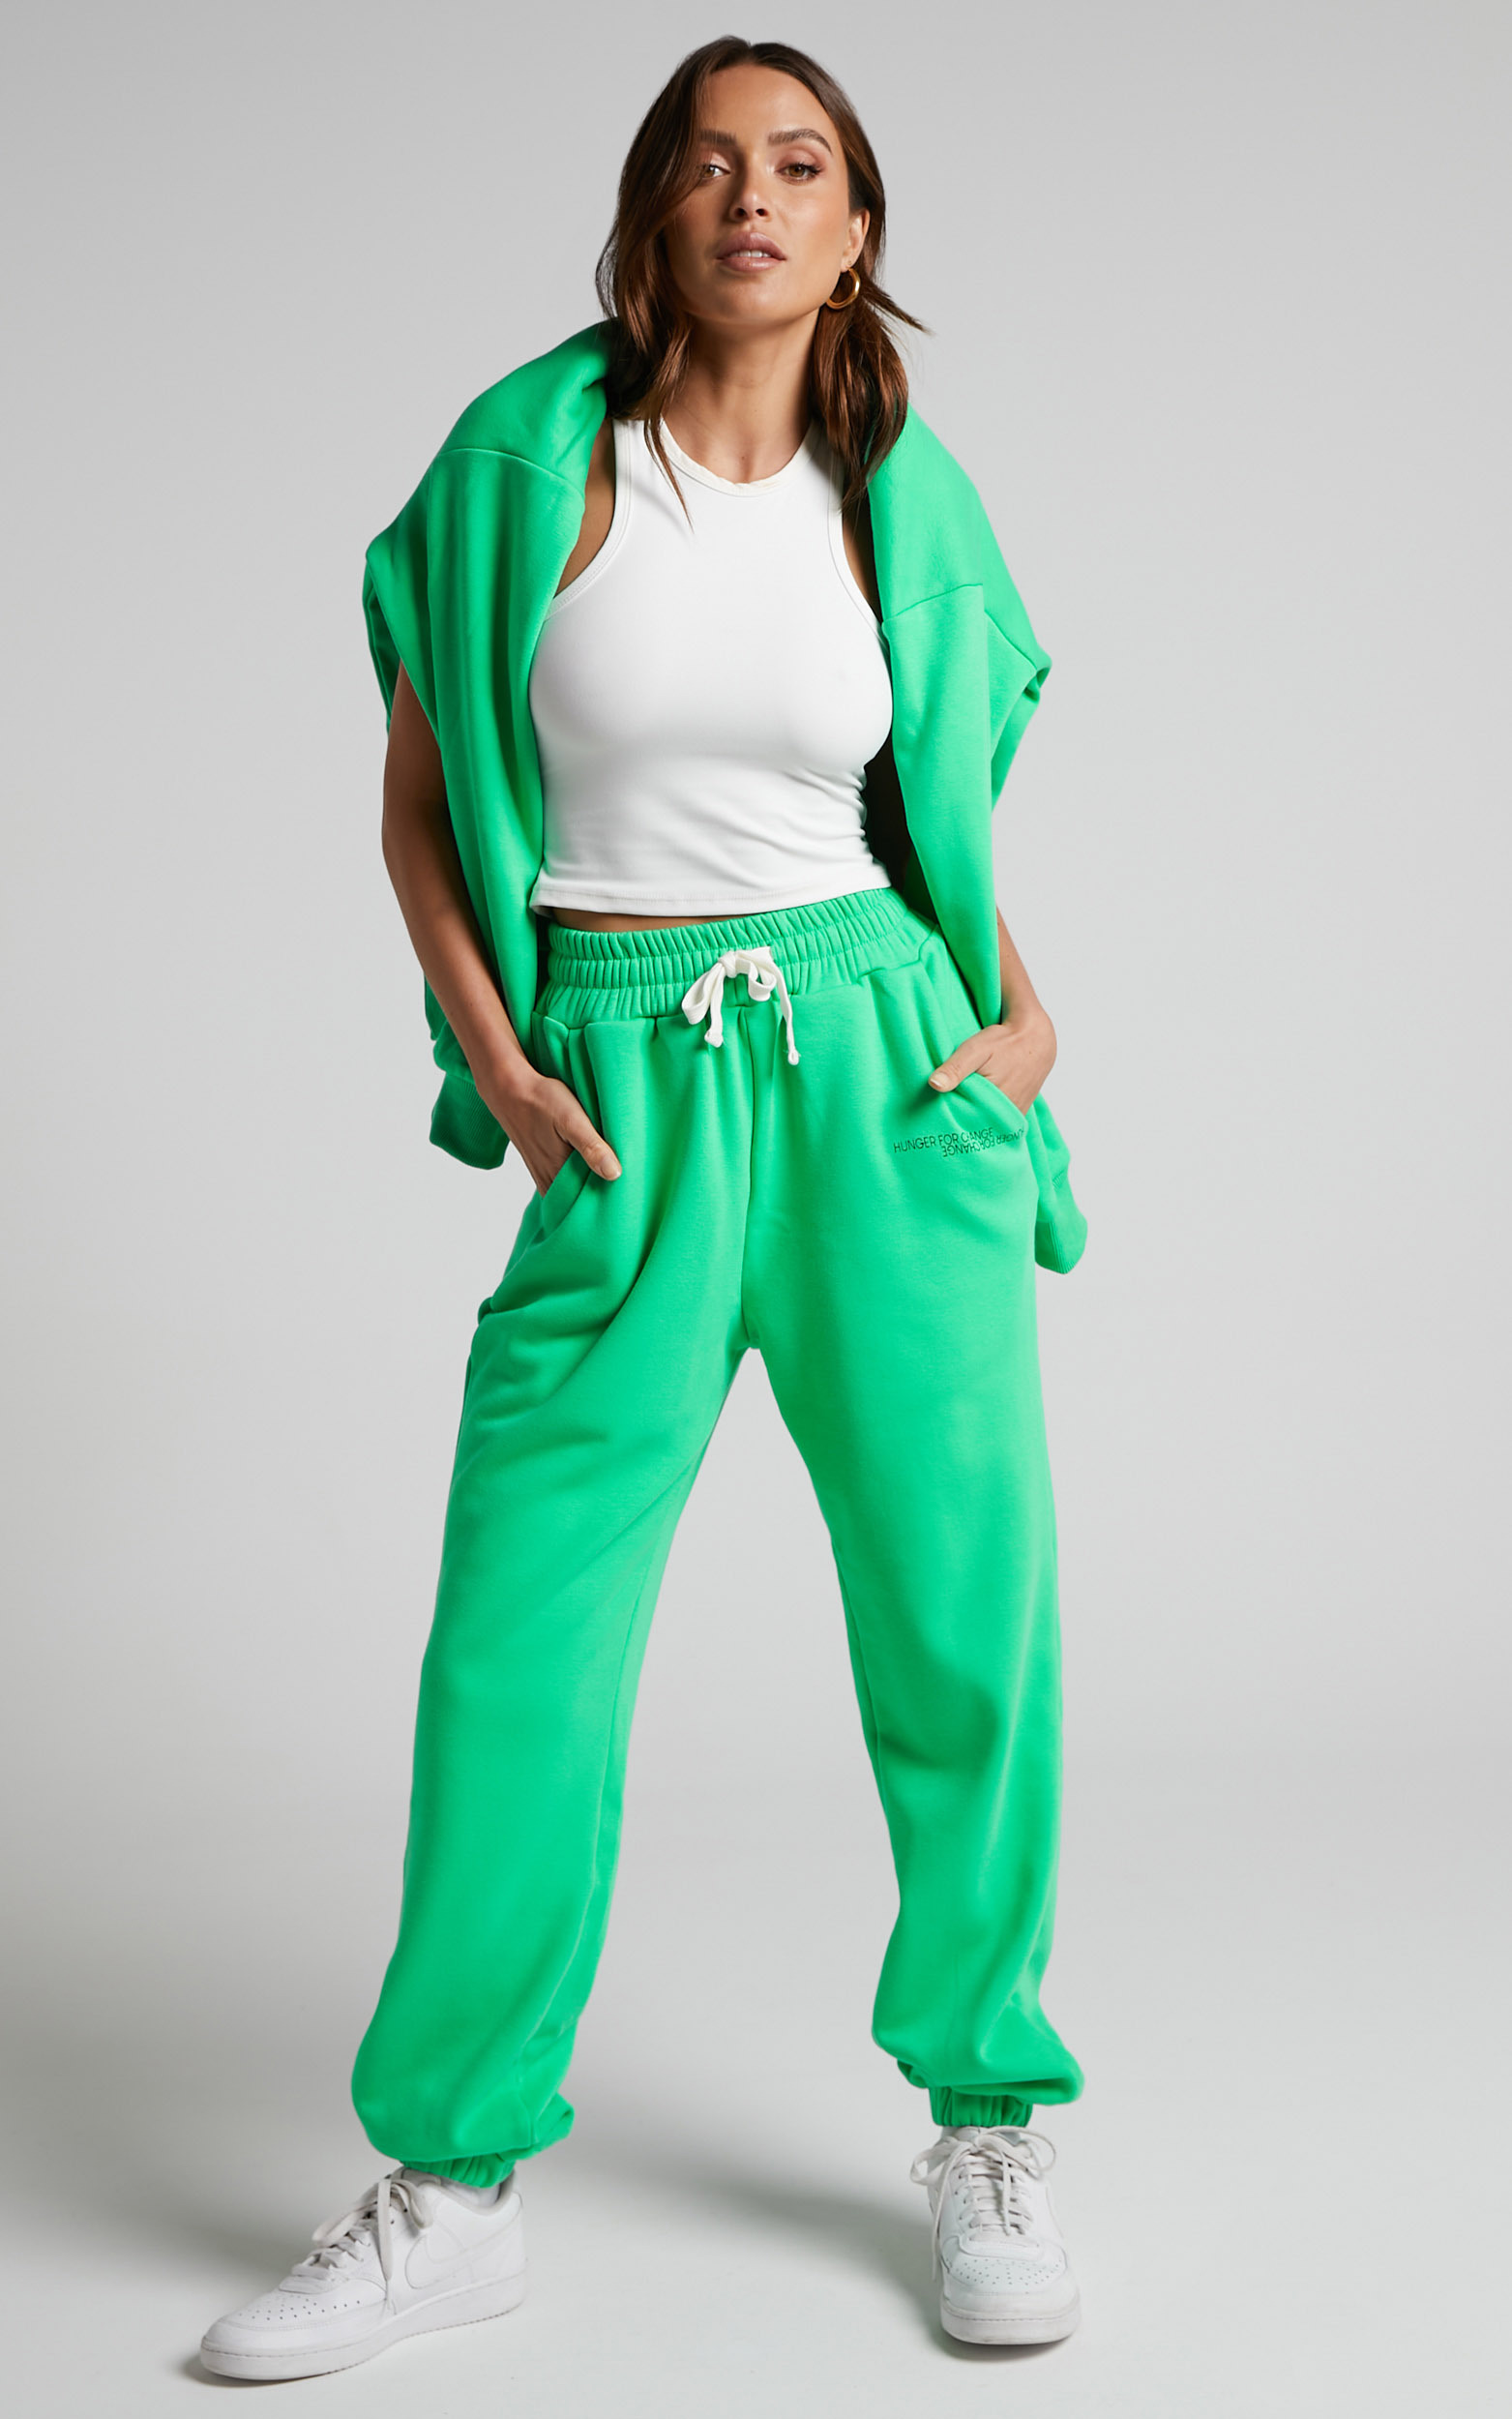 The Hunger Project x Showpo - Sweatpants in Green - L/XL, GRN1, hi-res image number null